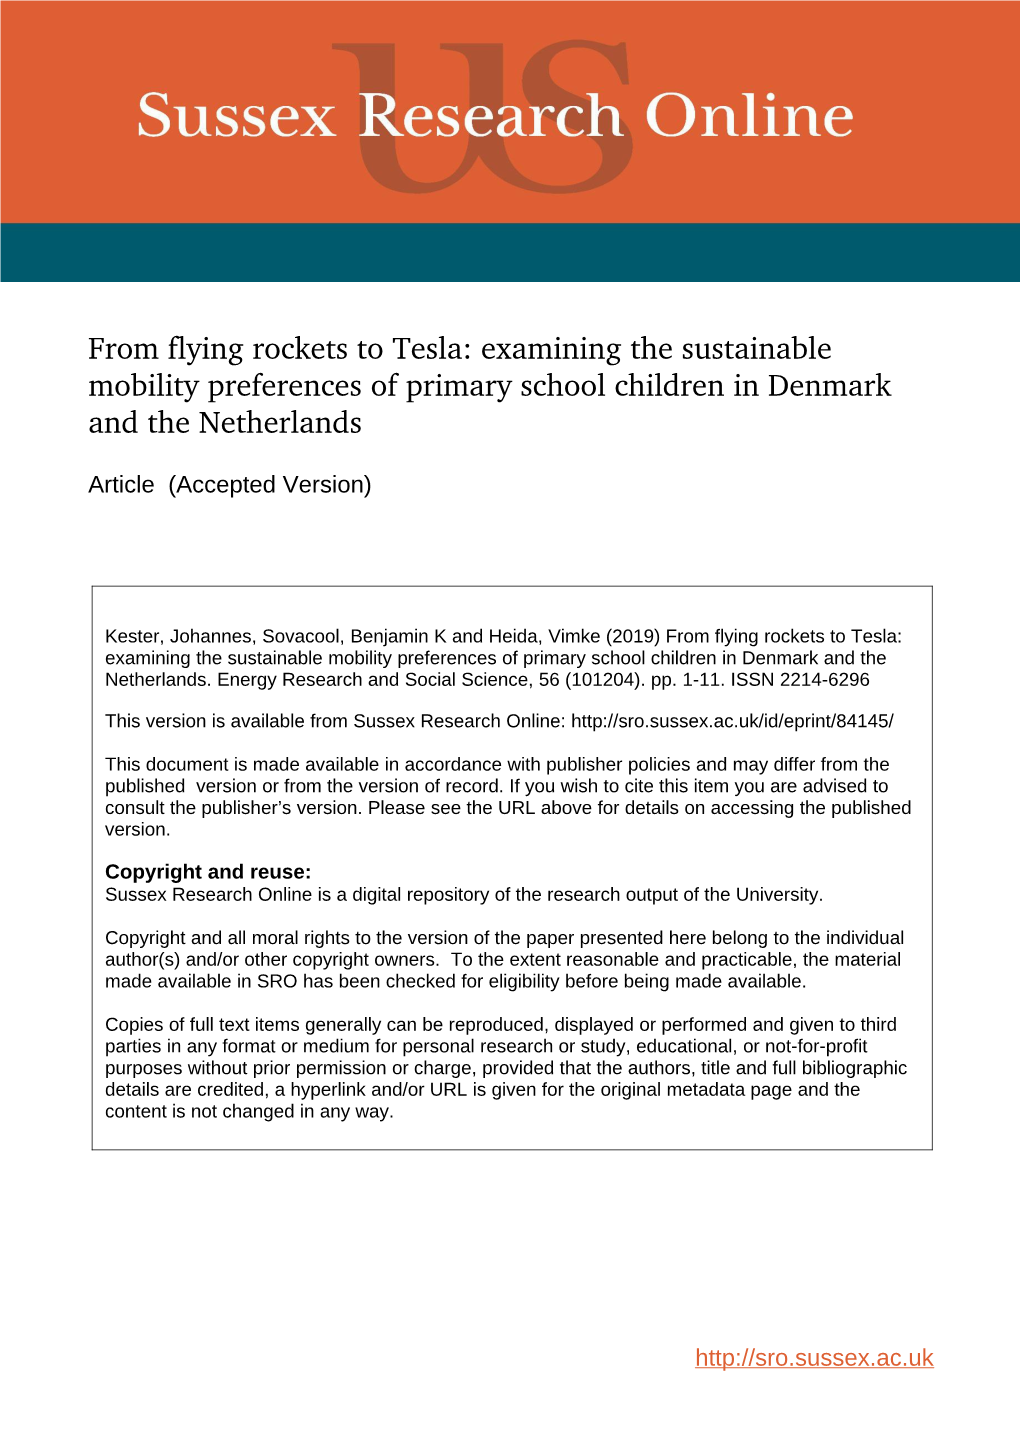 From Flying Rockets to Tesla: Examining the Sustainable Mobility Preferences of Primary School Children in Denmark and the Netherlands